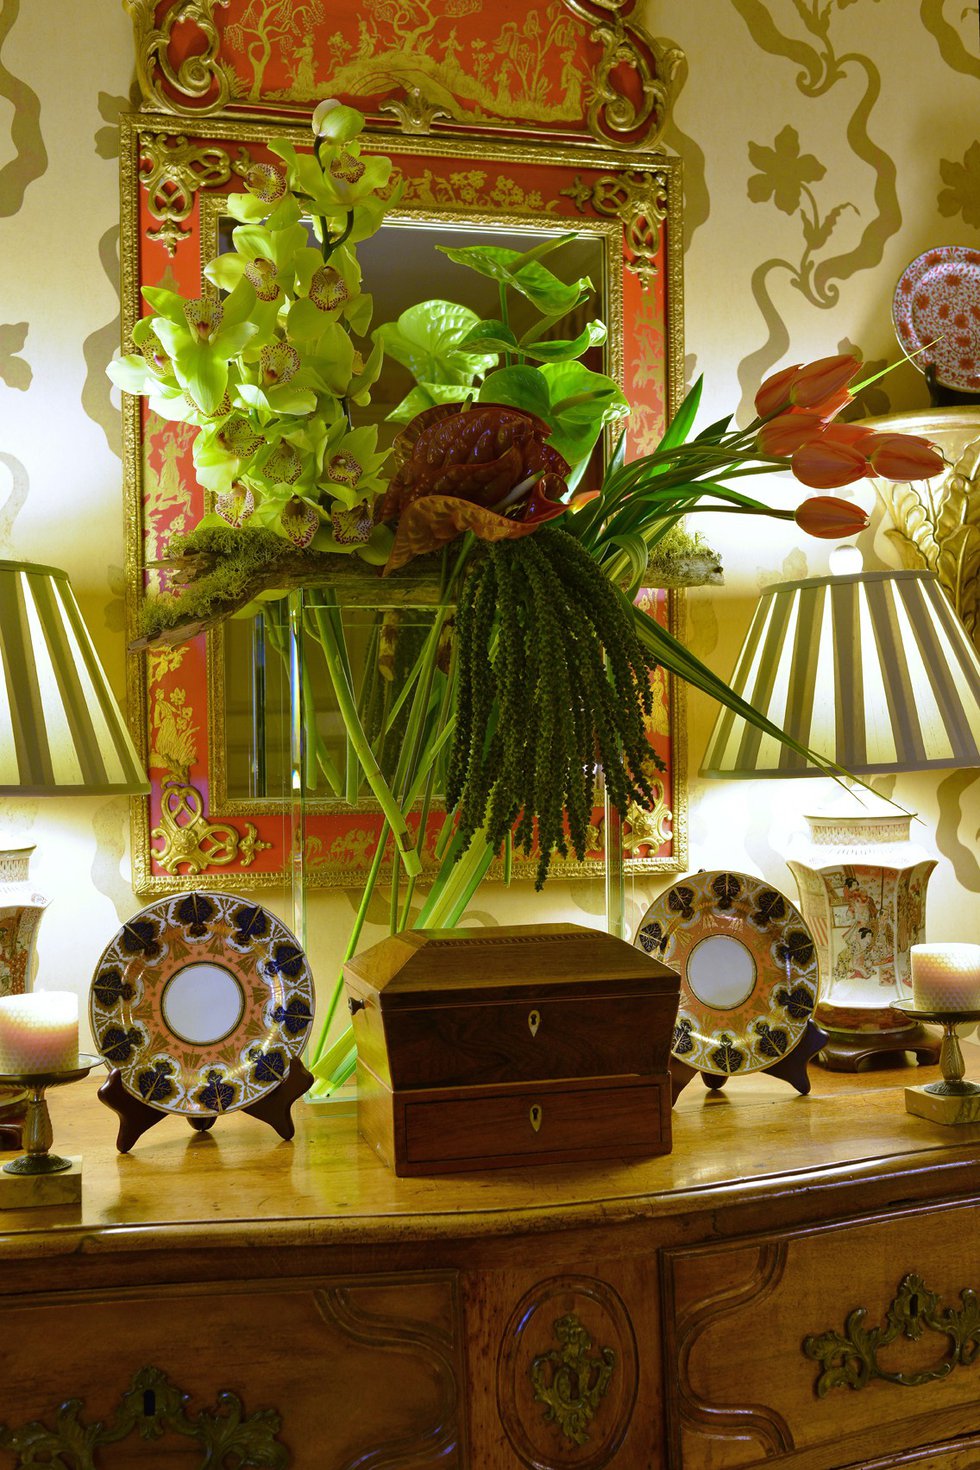 The table-top floral arrangement in the entry of Russell’s home is a vivid welcome to visitors, and its colors harmonize with the dining room display.